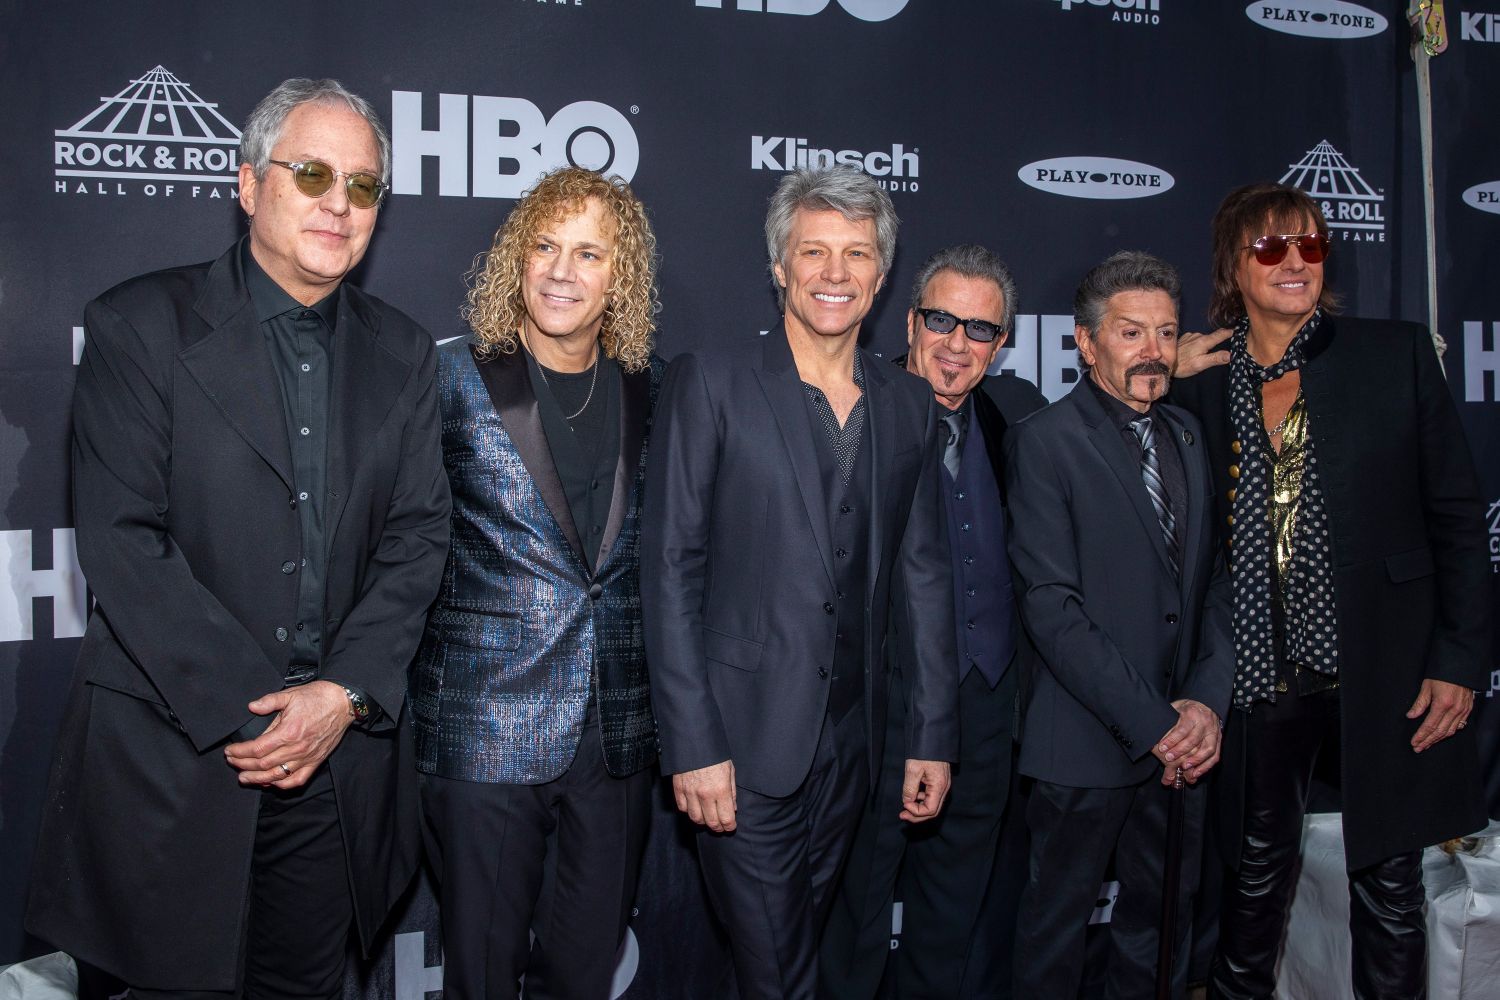 <p>Inducted by Howard Stern, the boys from small-town New Jersey were admitted to the esteemed Rock and Roll Hall of Fame in 2018 in a class that included The Cars, Nina Simone, The Moody Blues, and Dire Straits.</p>